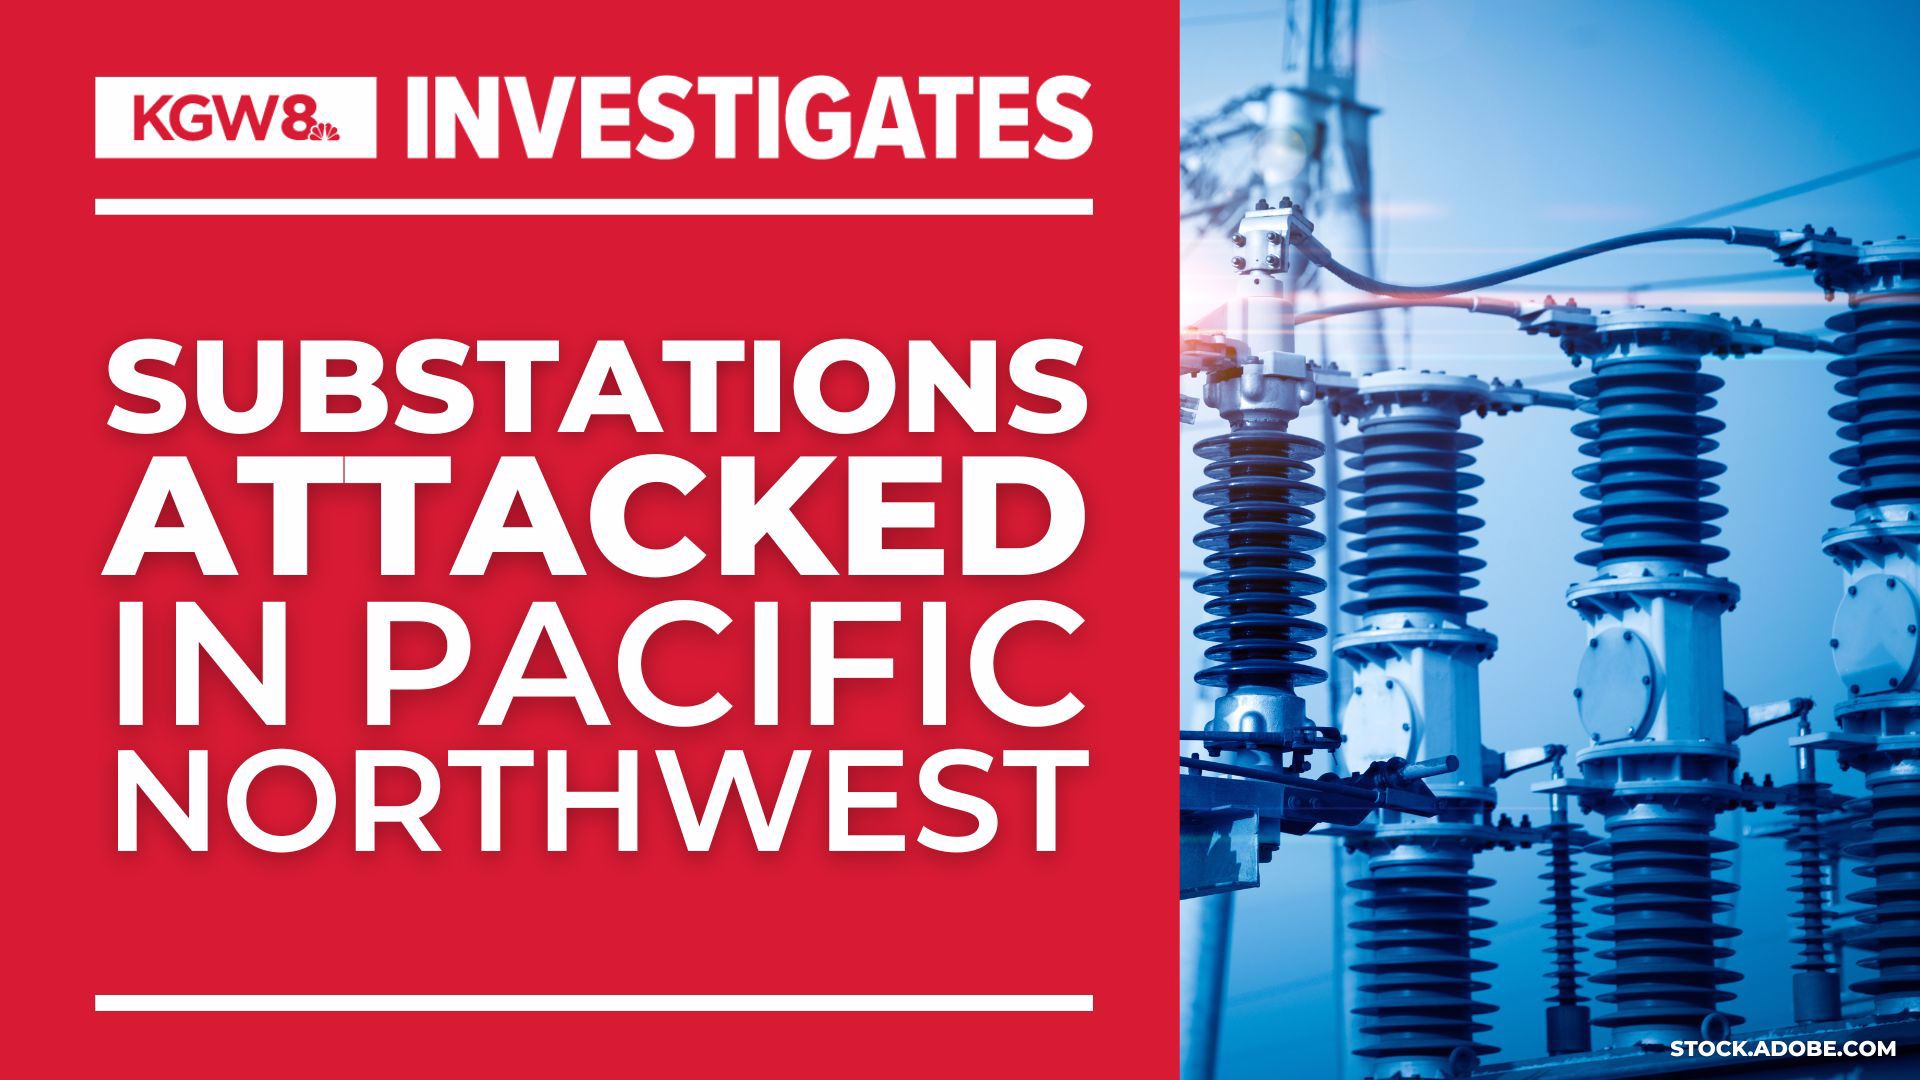 The memo suggests that power companies have reported physical attacks on substations using tools, arson, firearms and metal chains